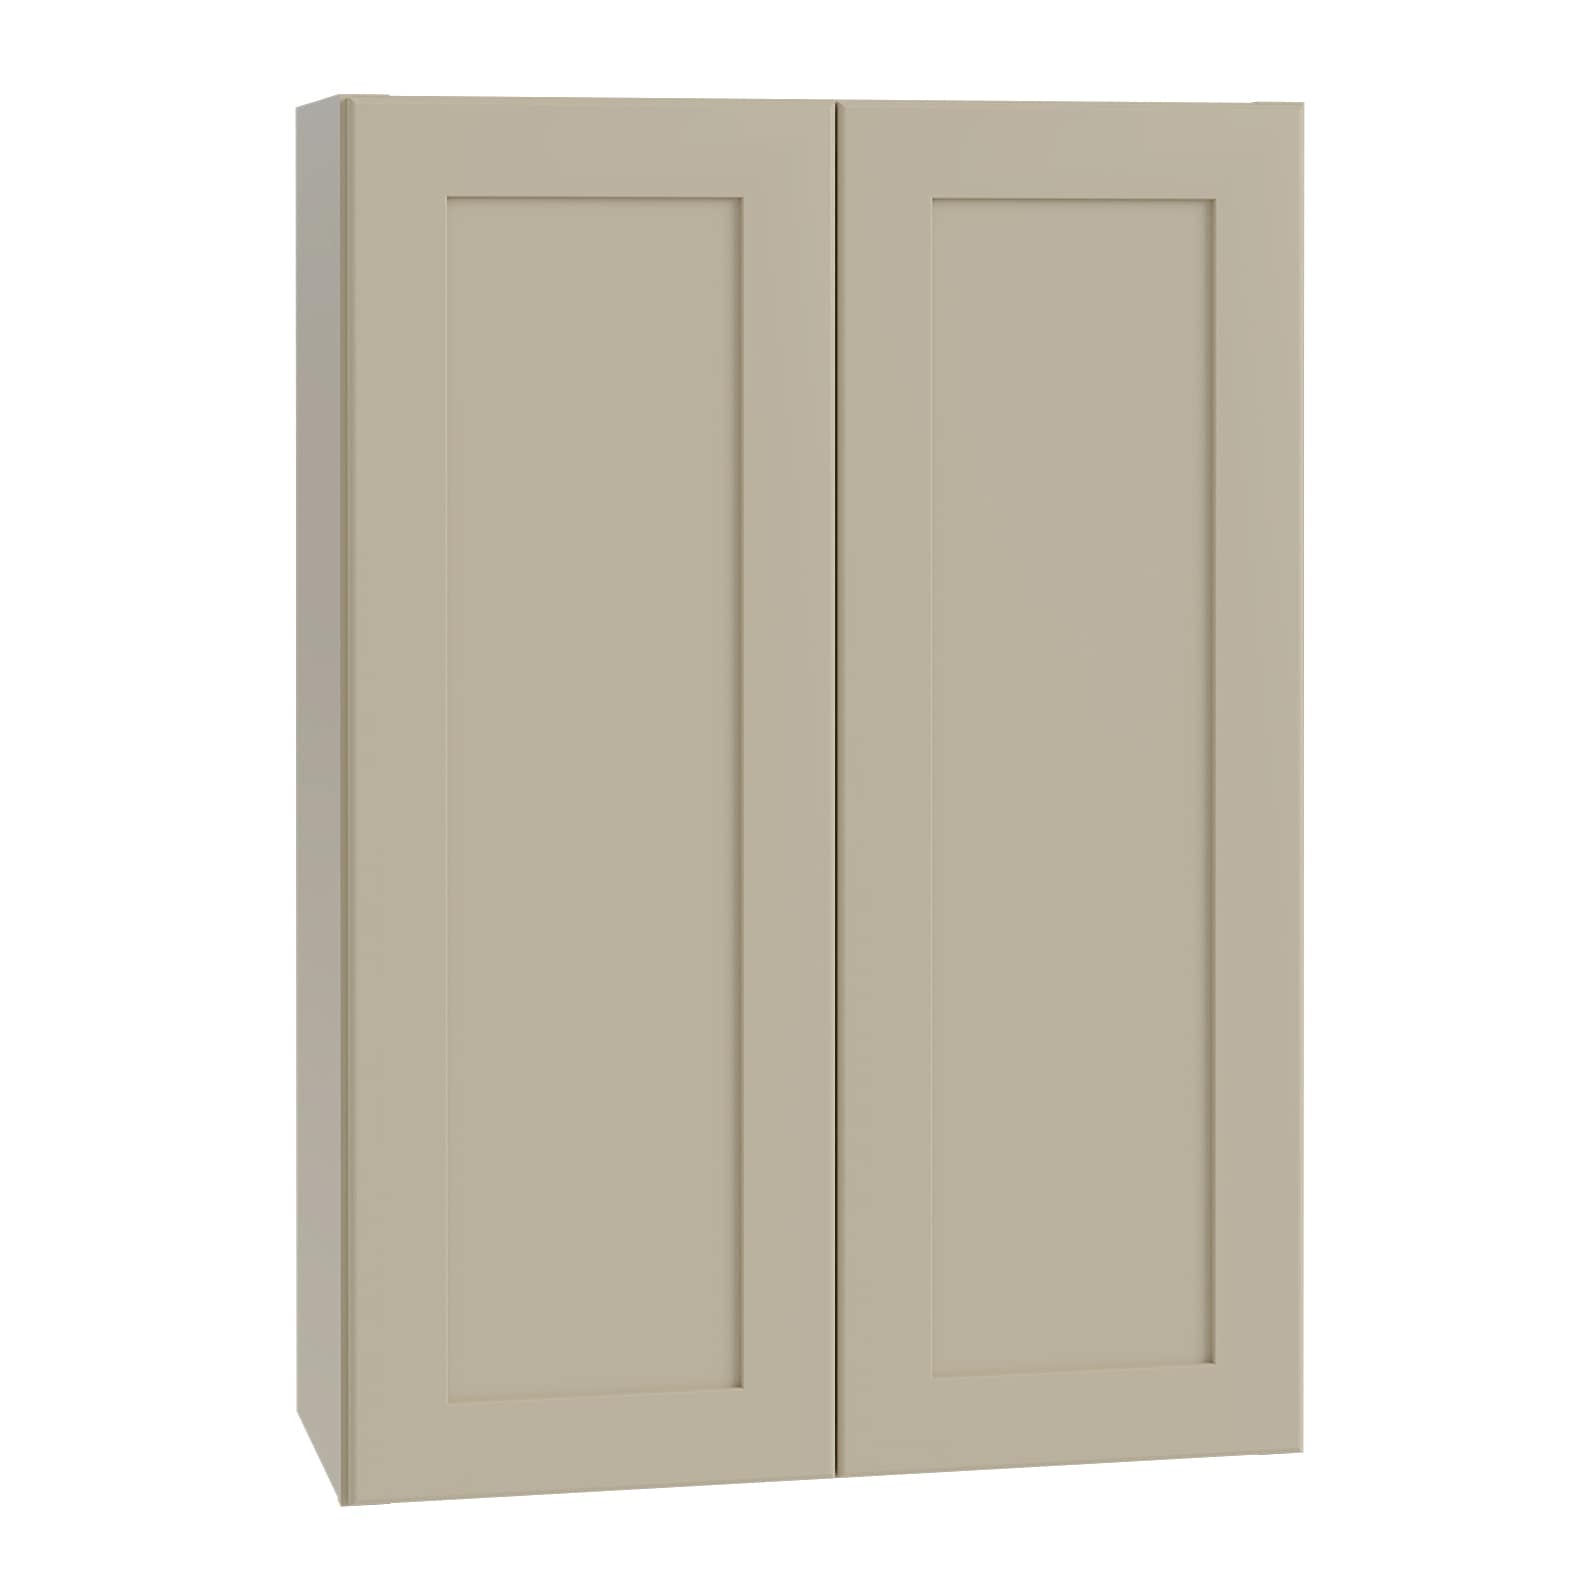 Luxxe Cabinetry 27-in W x 42-in H x 12-in D Norfolk Blended Cream Painted Door Wall Fully Assembled Semi-custom Cabinet in Off-White | W2742-NBC